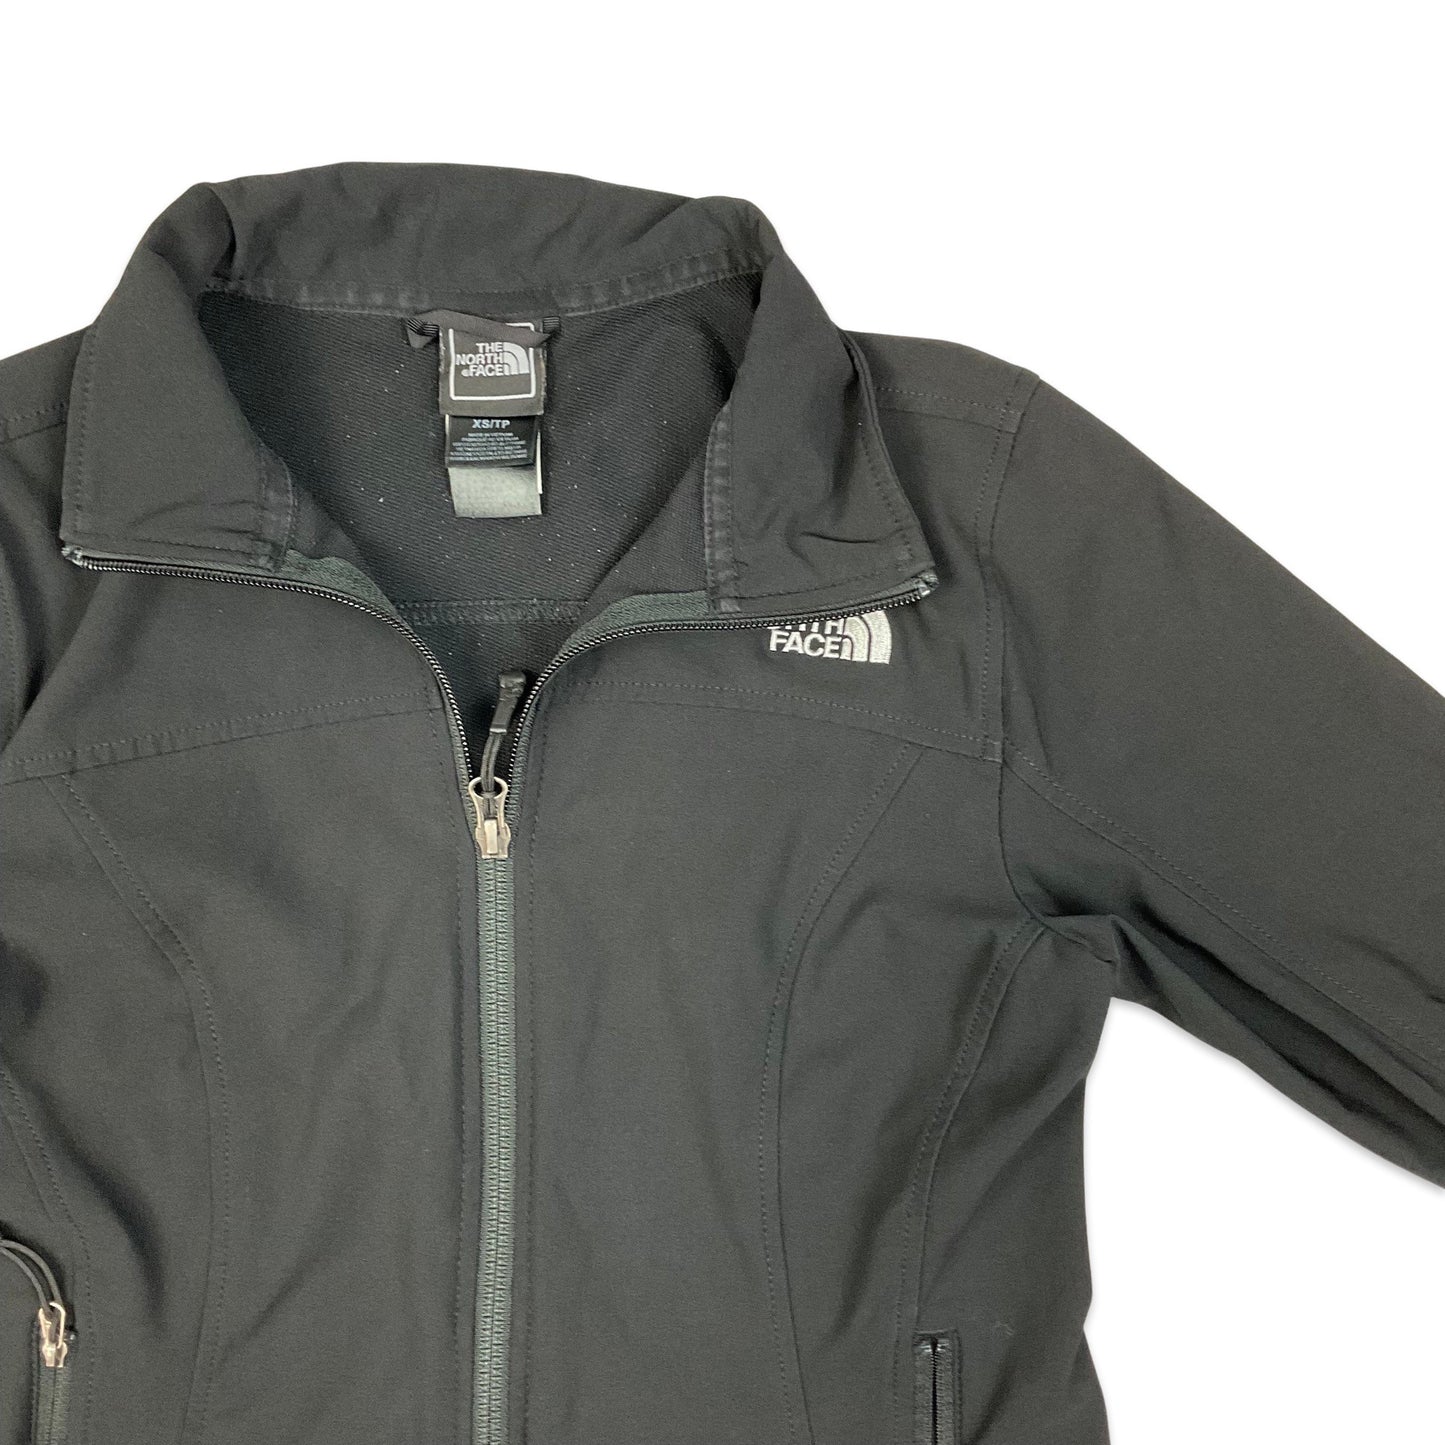 The North Face Black Soft Shell Zip Up Jacket 4 6